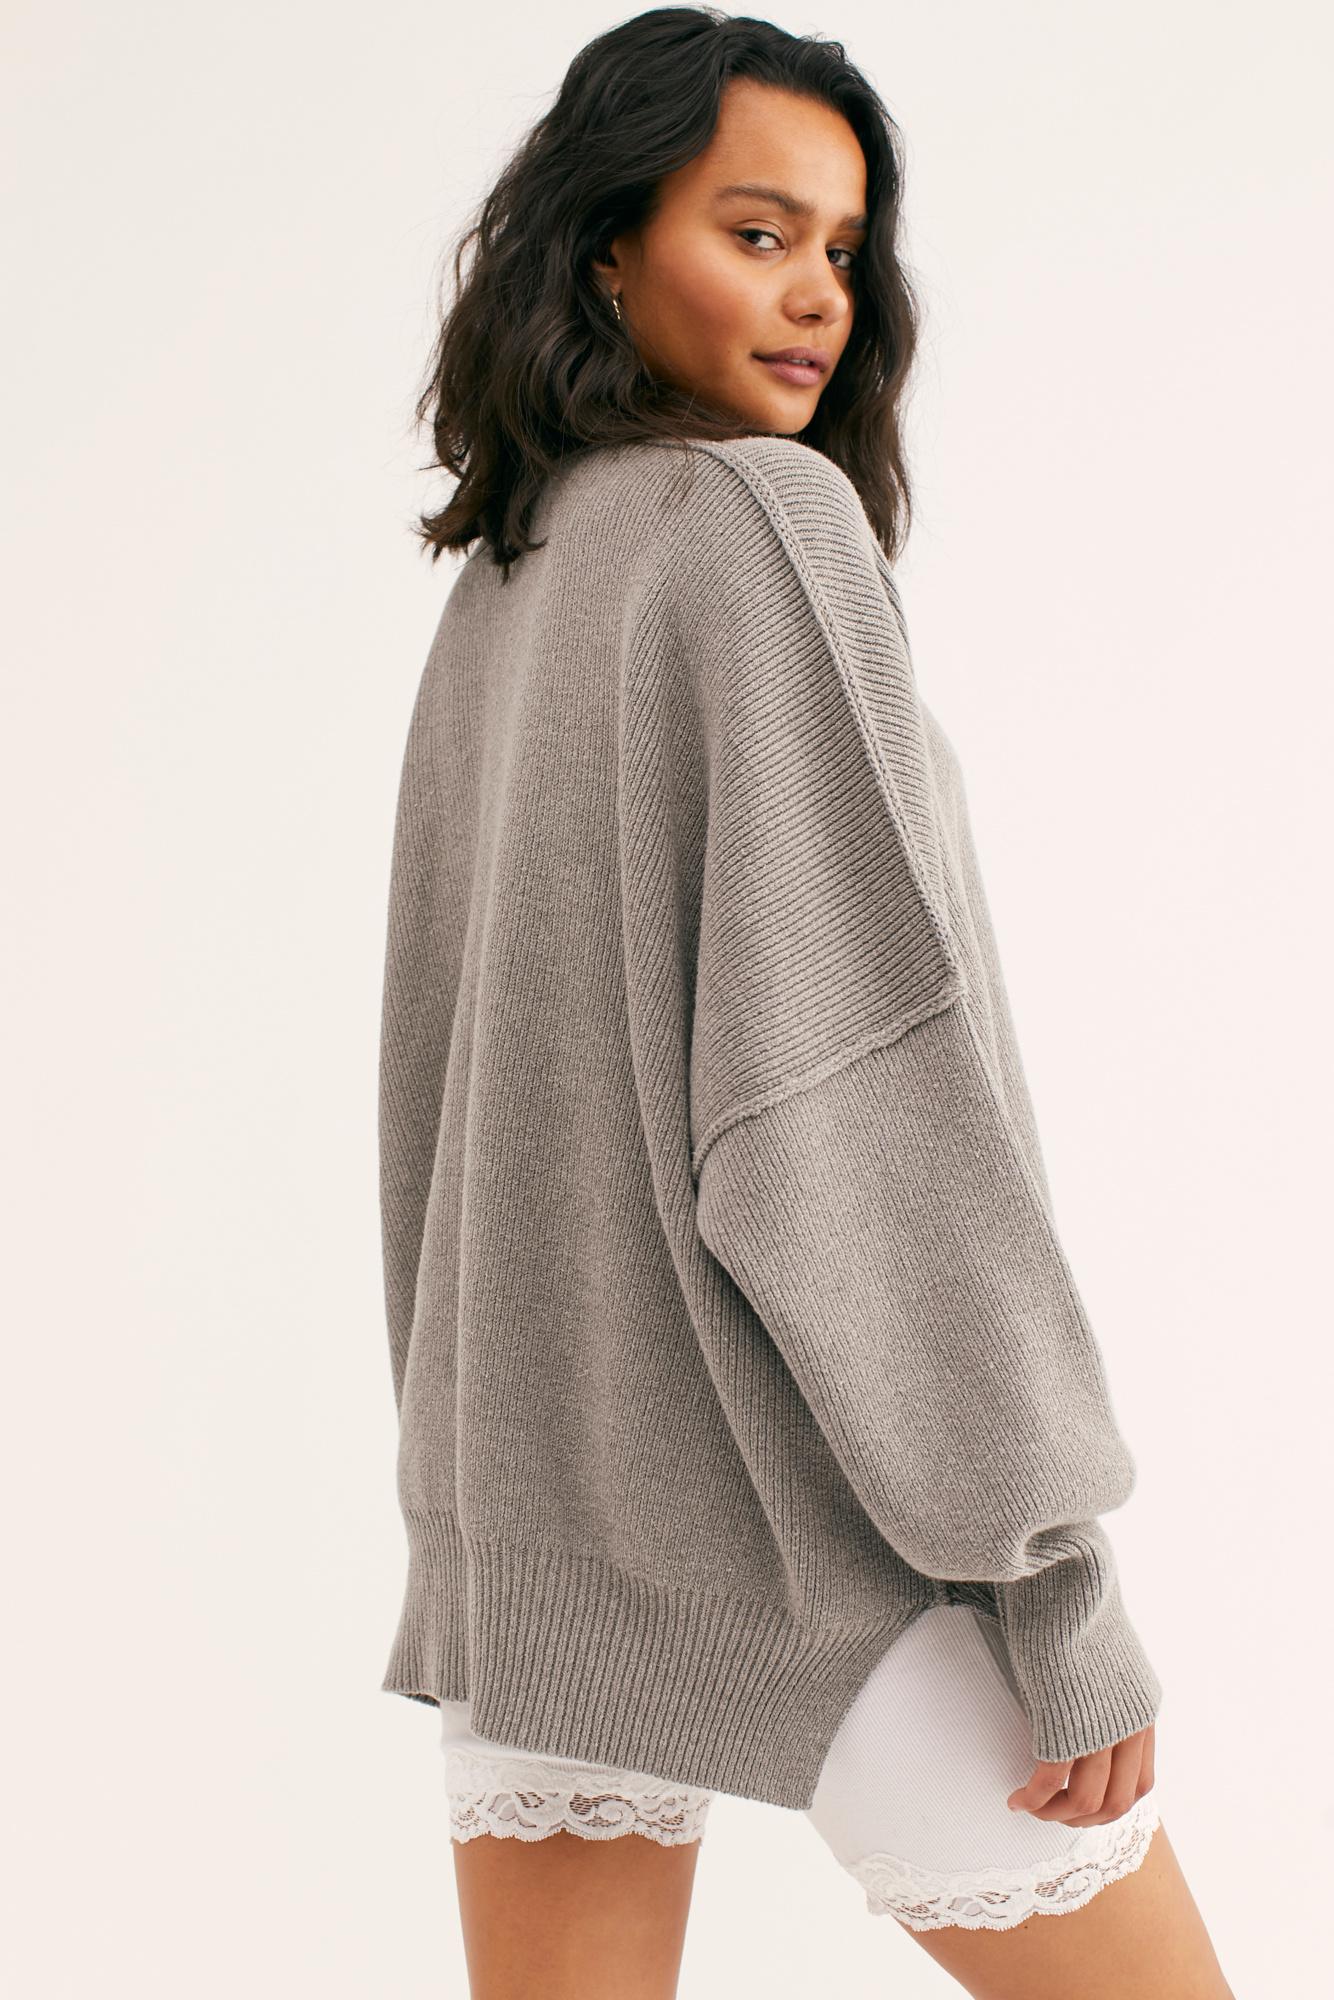 Free People Synthetic Easy Street Tunic in Heather Grey (Gray) - Lyst